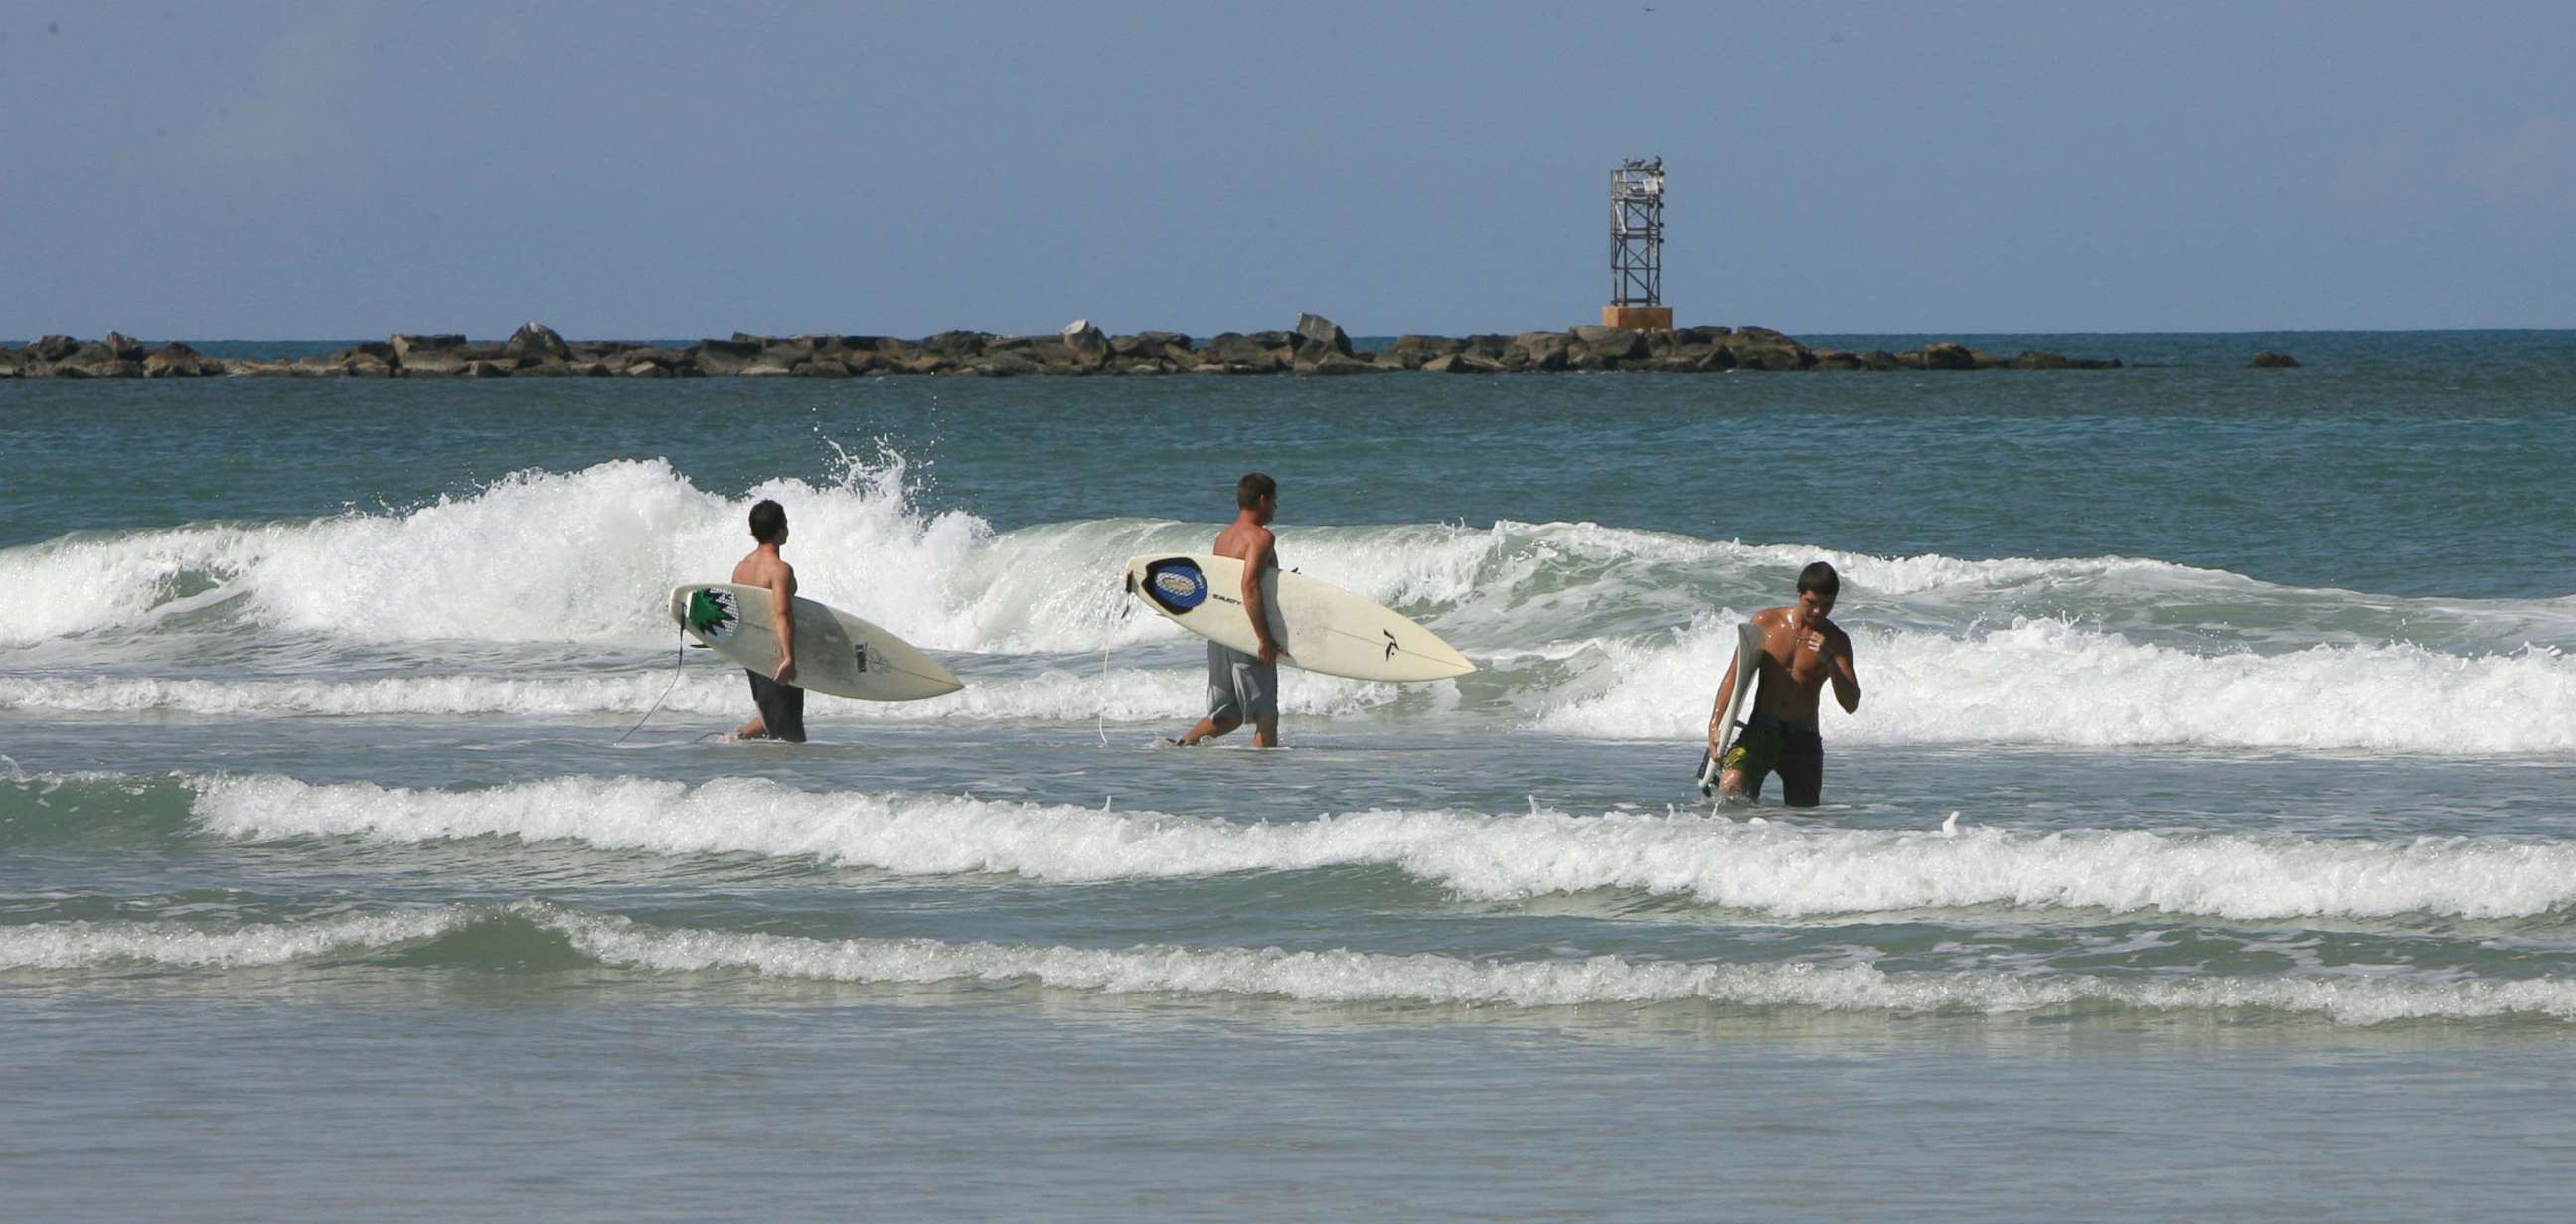 PHOTO: Surfers hit the waves at New Smyrna Beach in Florida, Aug. 29, 2007.